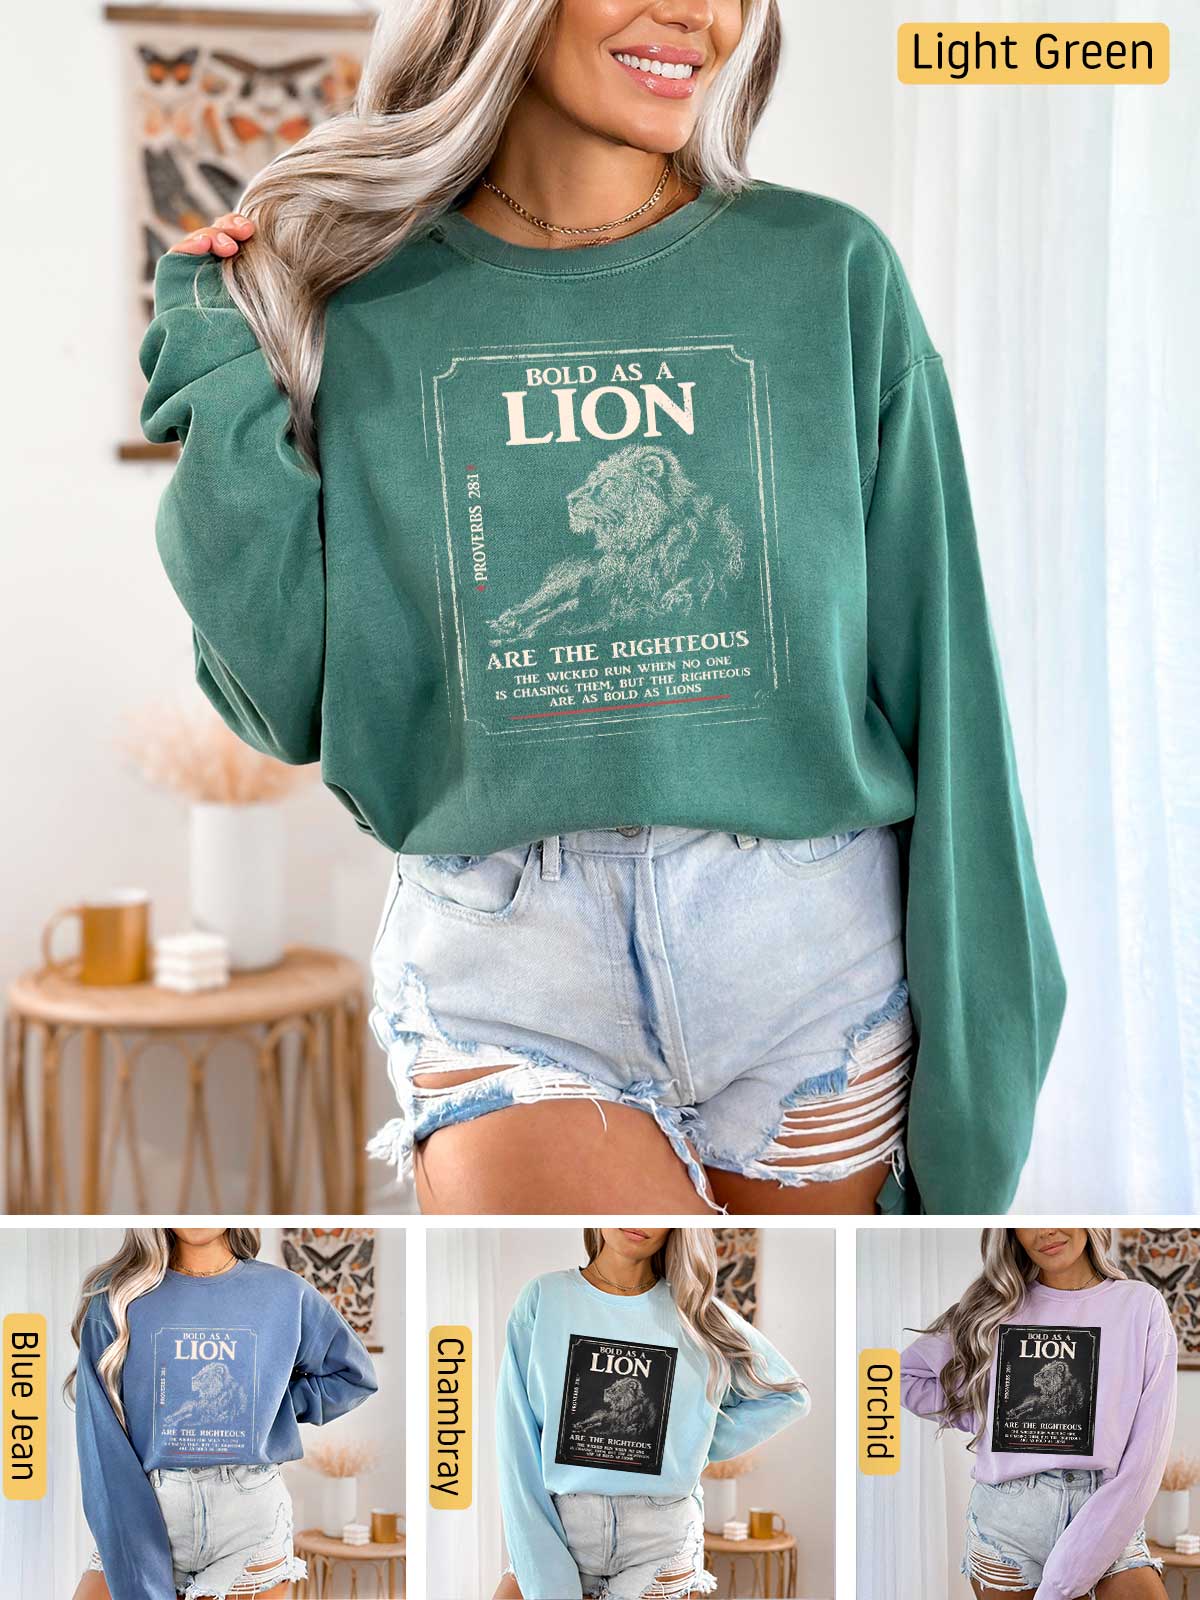 a collage of photos of a woman wearing a lion sweatshirt